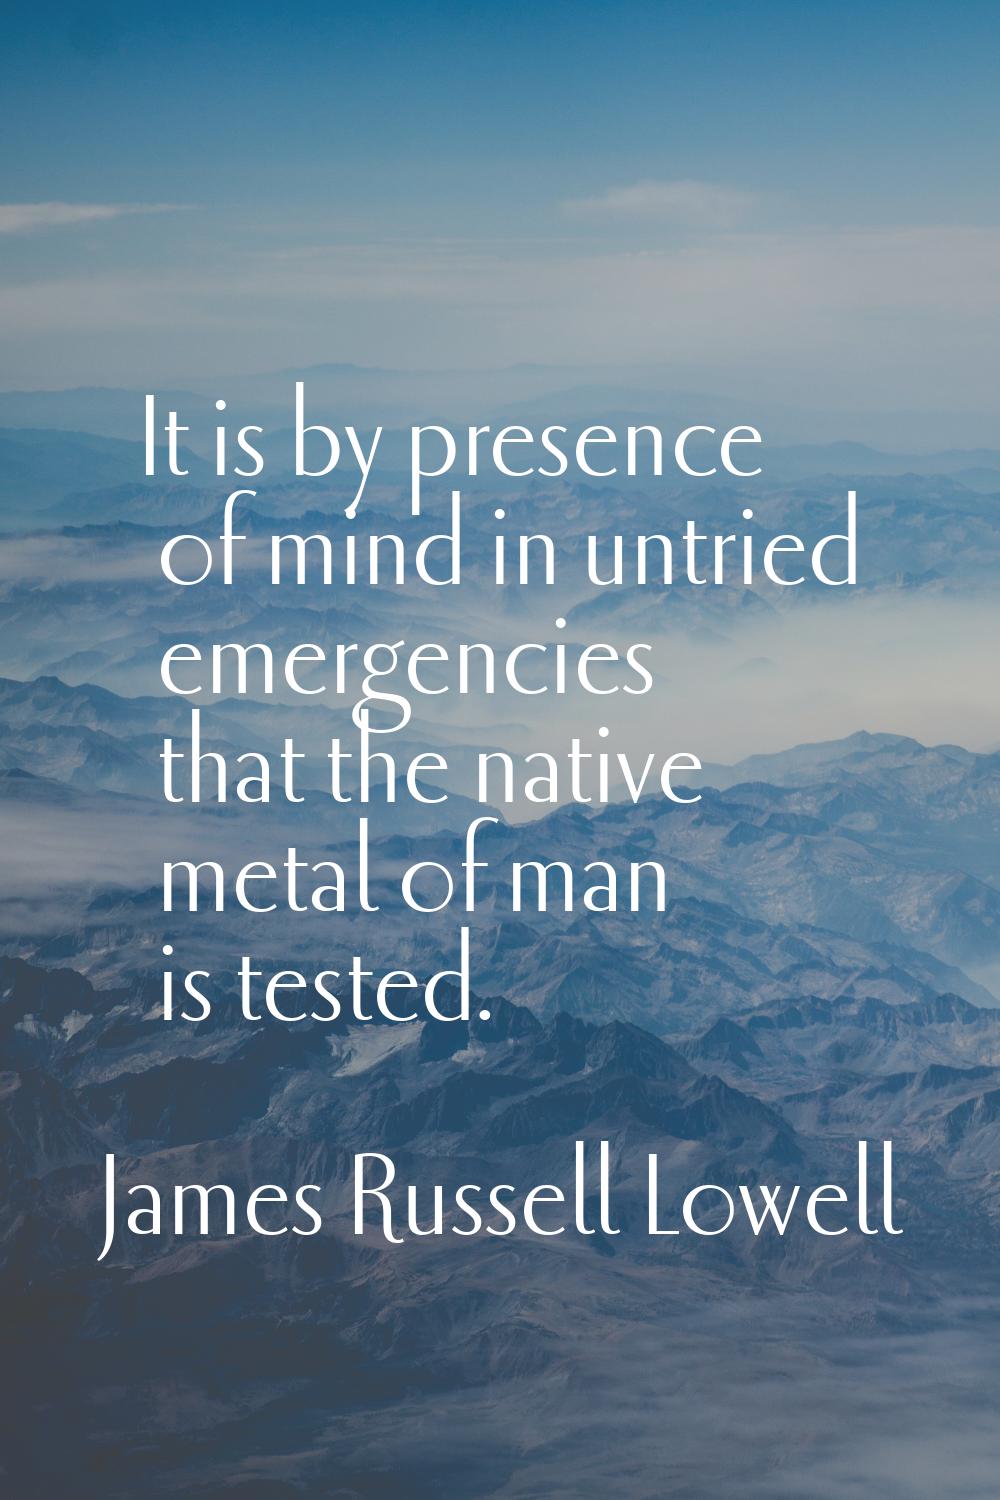 It is by presence of mind in untried emergencies that the native metal of man is tested.